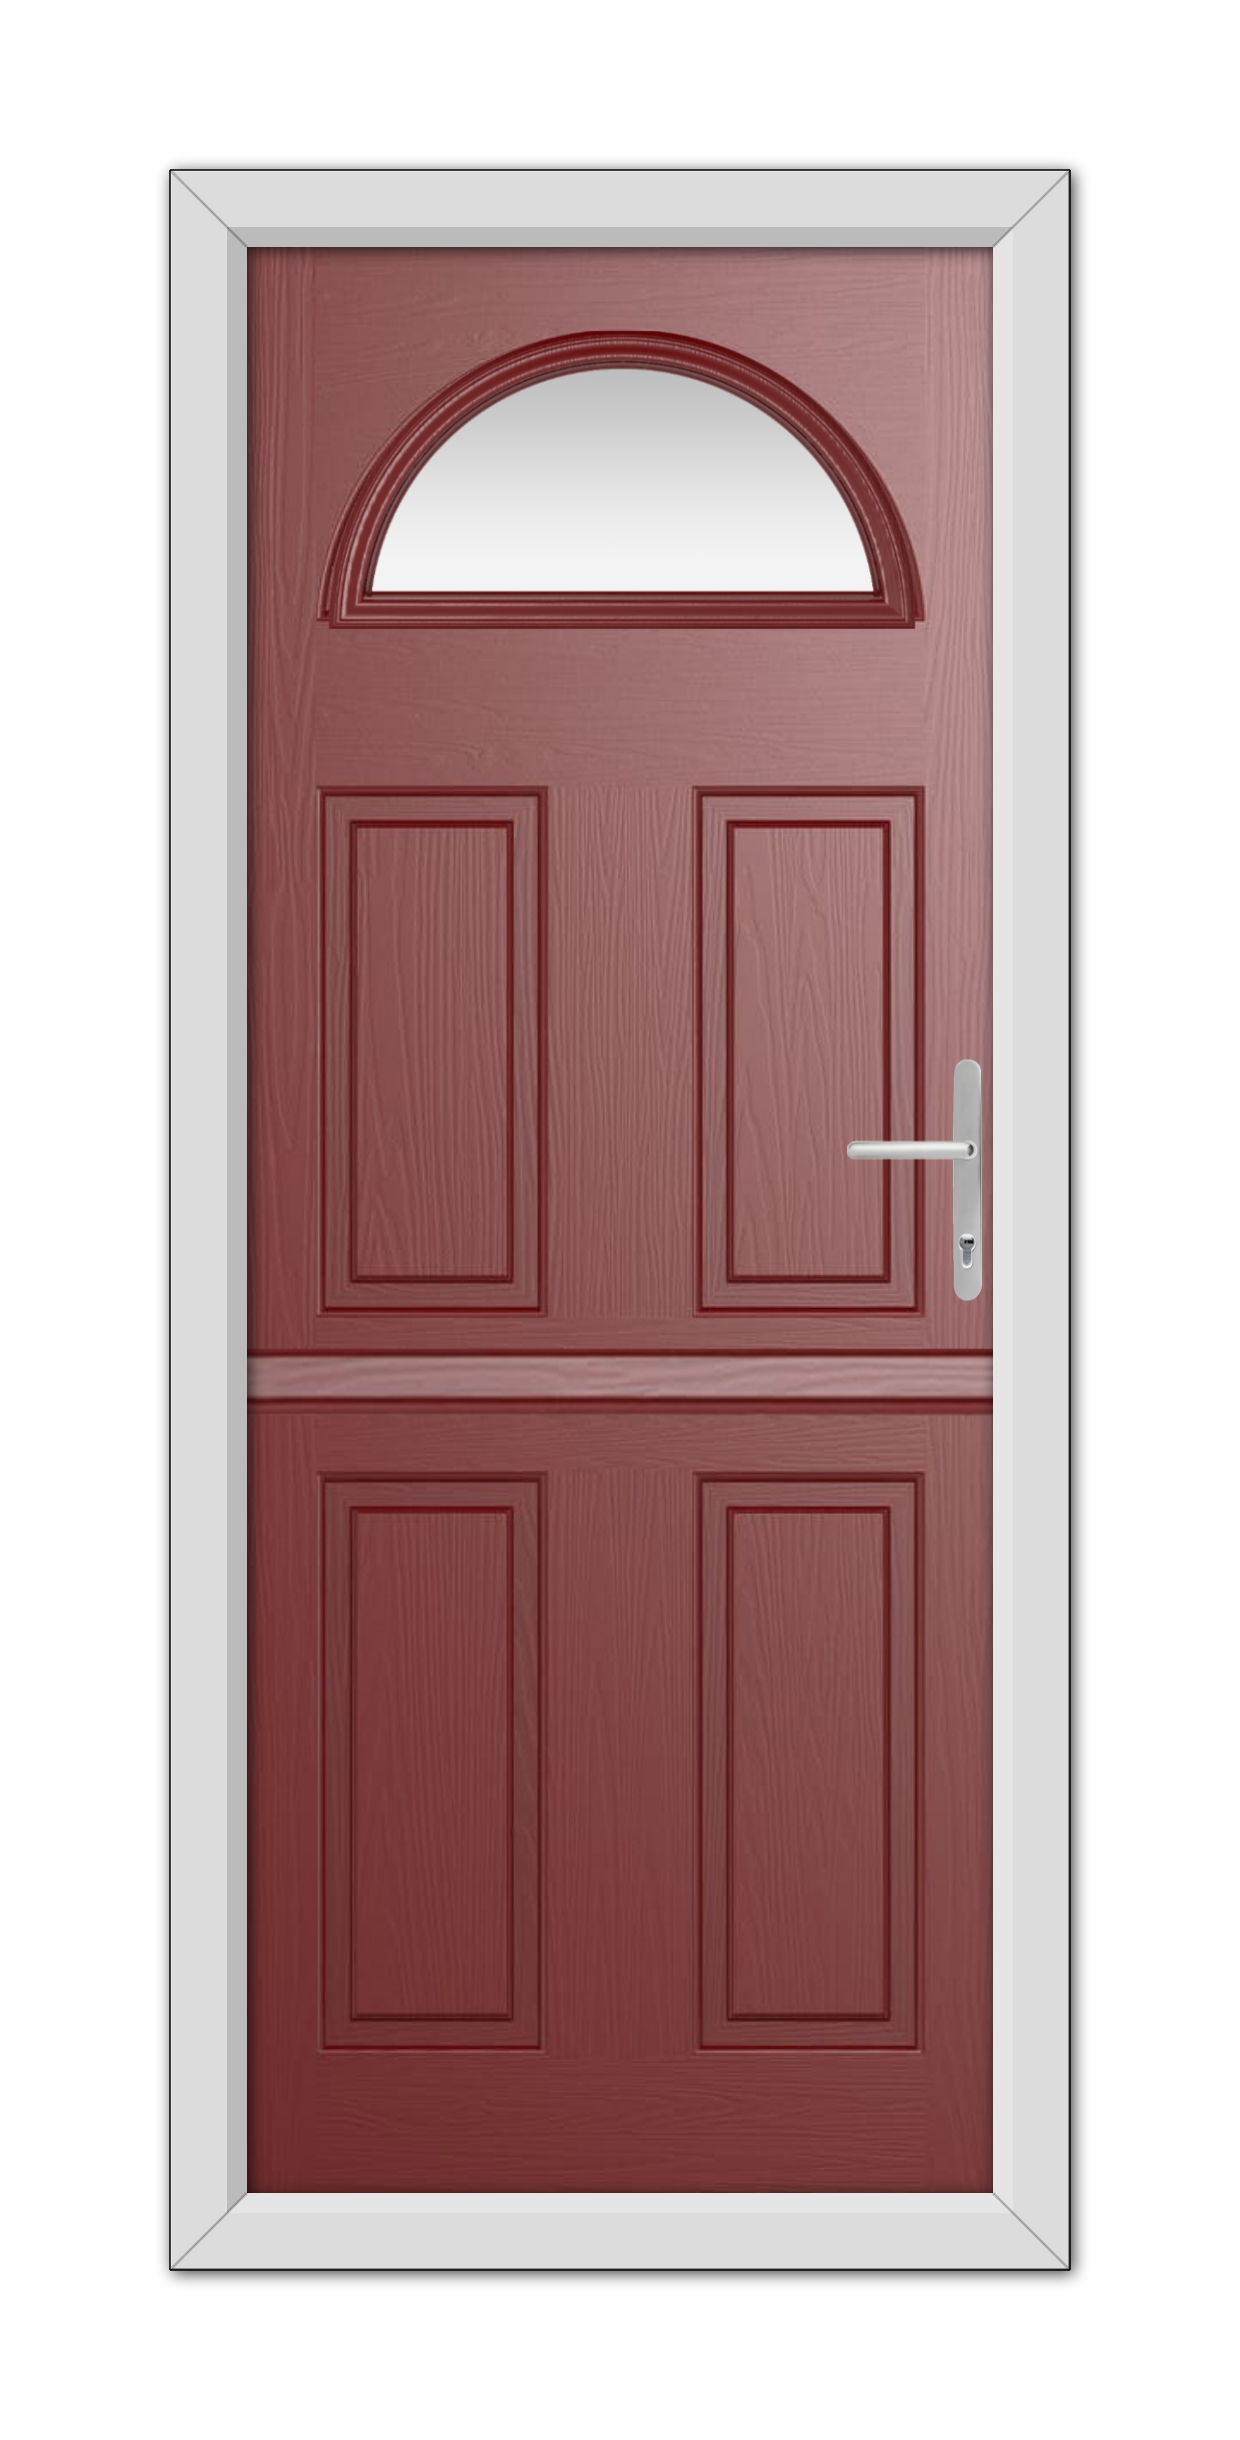 A closed Red Winslow 1 Stable Composite Door 48mm Timber Core with an arch top, featuring a silver handle, set within a white door frame.